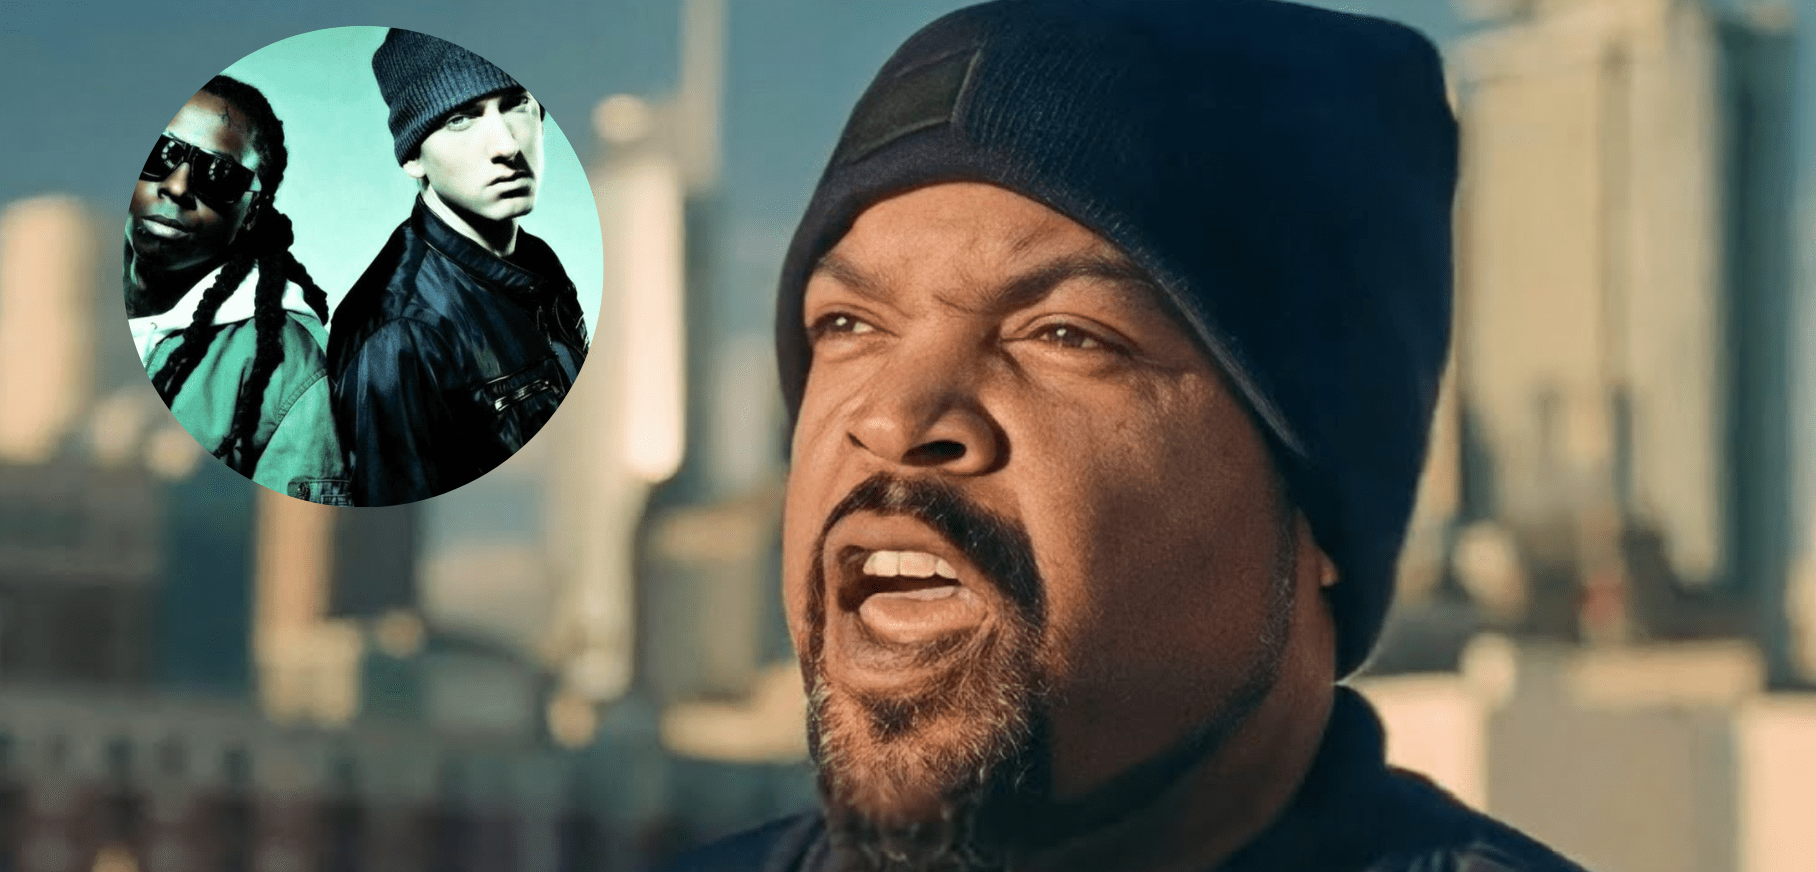 Ice Cube wants Eminem and Lil Wayne in his Rap Battle squad